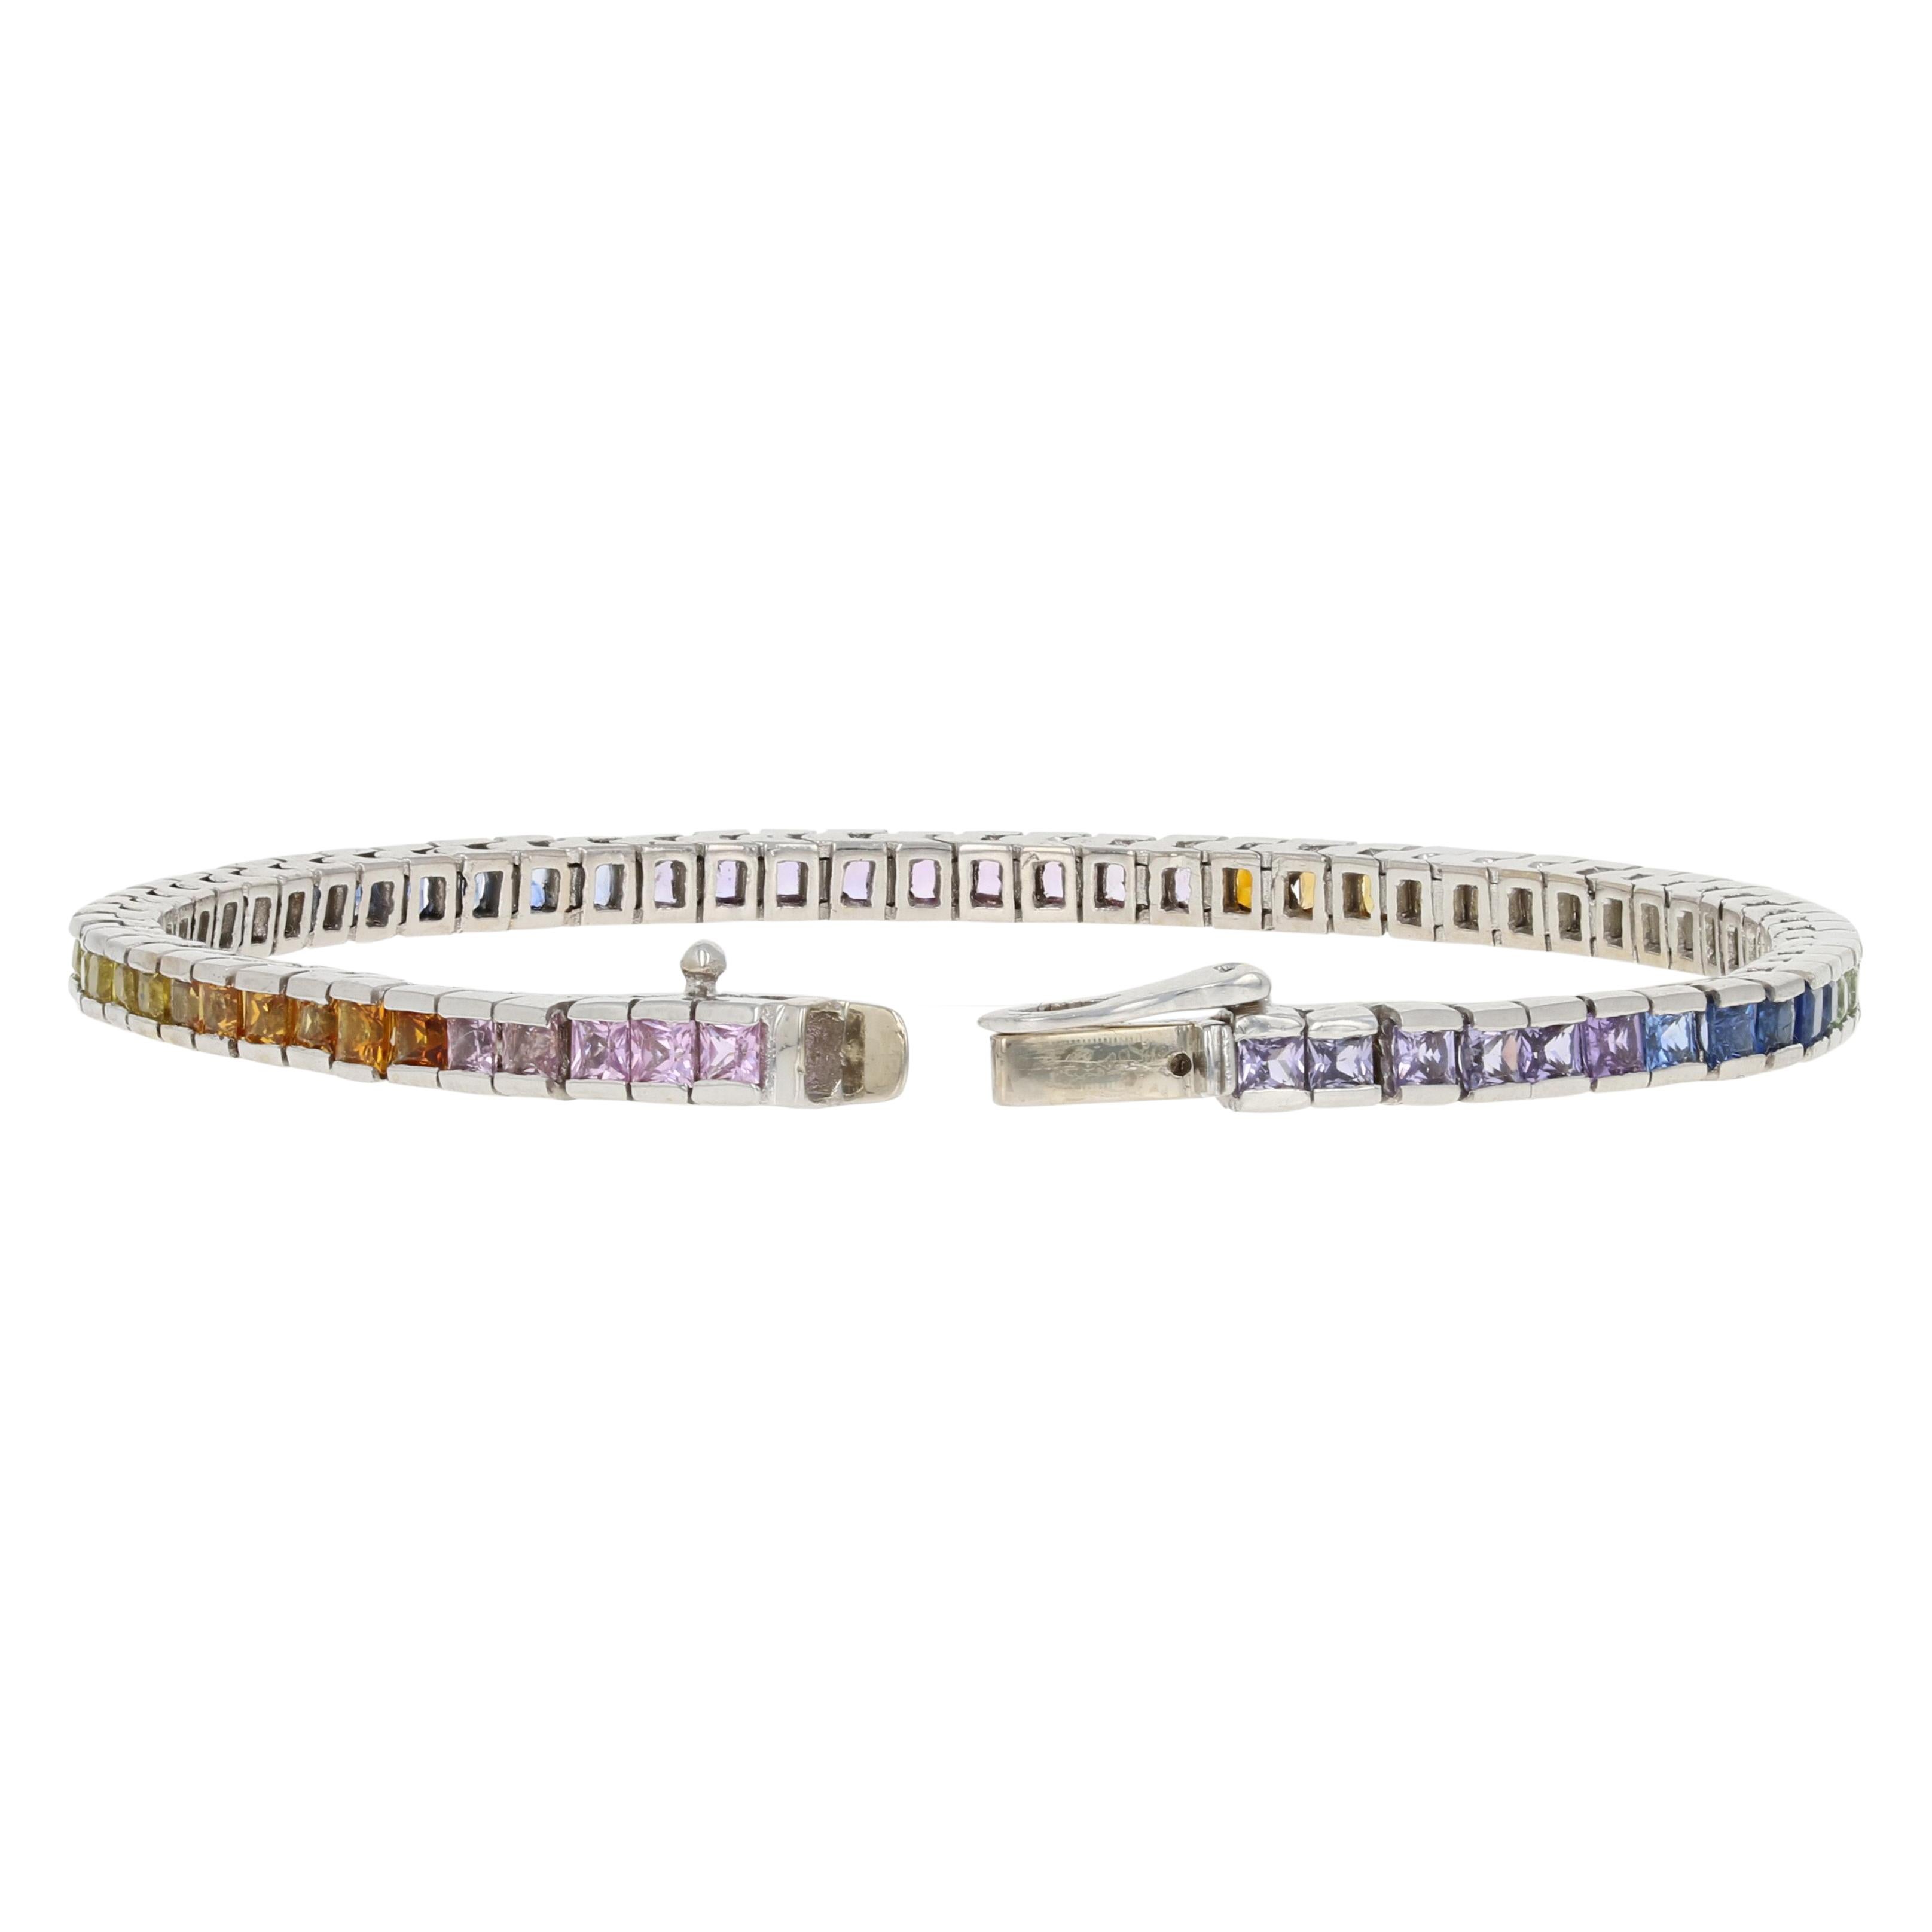 Invigorate your wardrobe with a kaleidoscope of color! Featuring a modern tennis design, this bracelet showcases radiant, multi-color sapphires set in glistening 14k white gold.  

Metal Content: Guaranteed 14k Gold as stamped

Stone